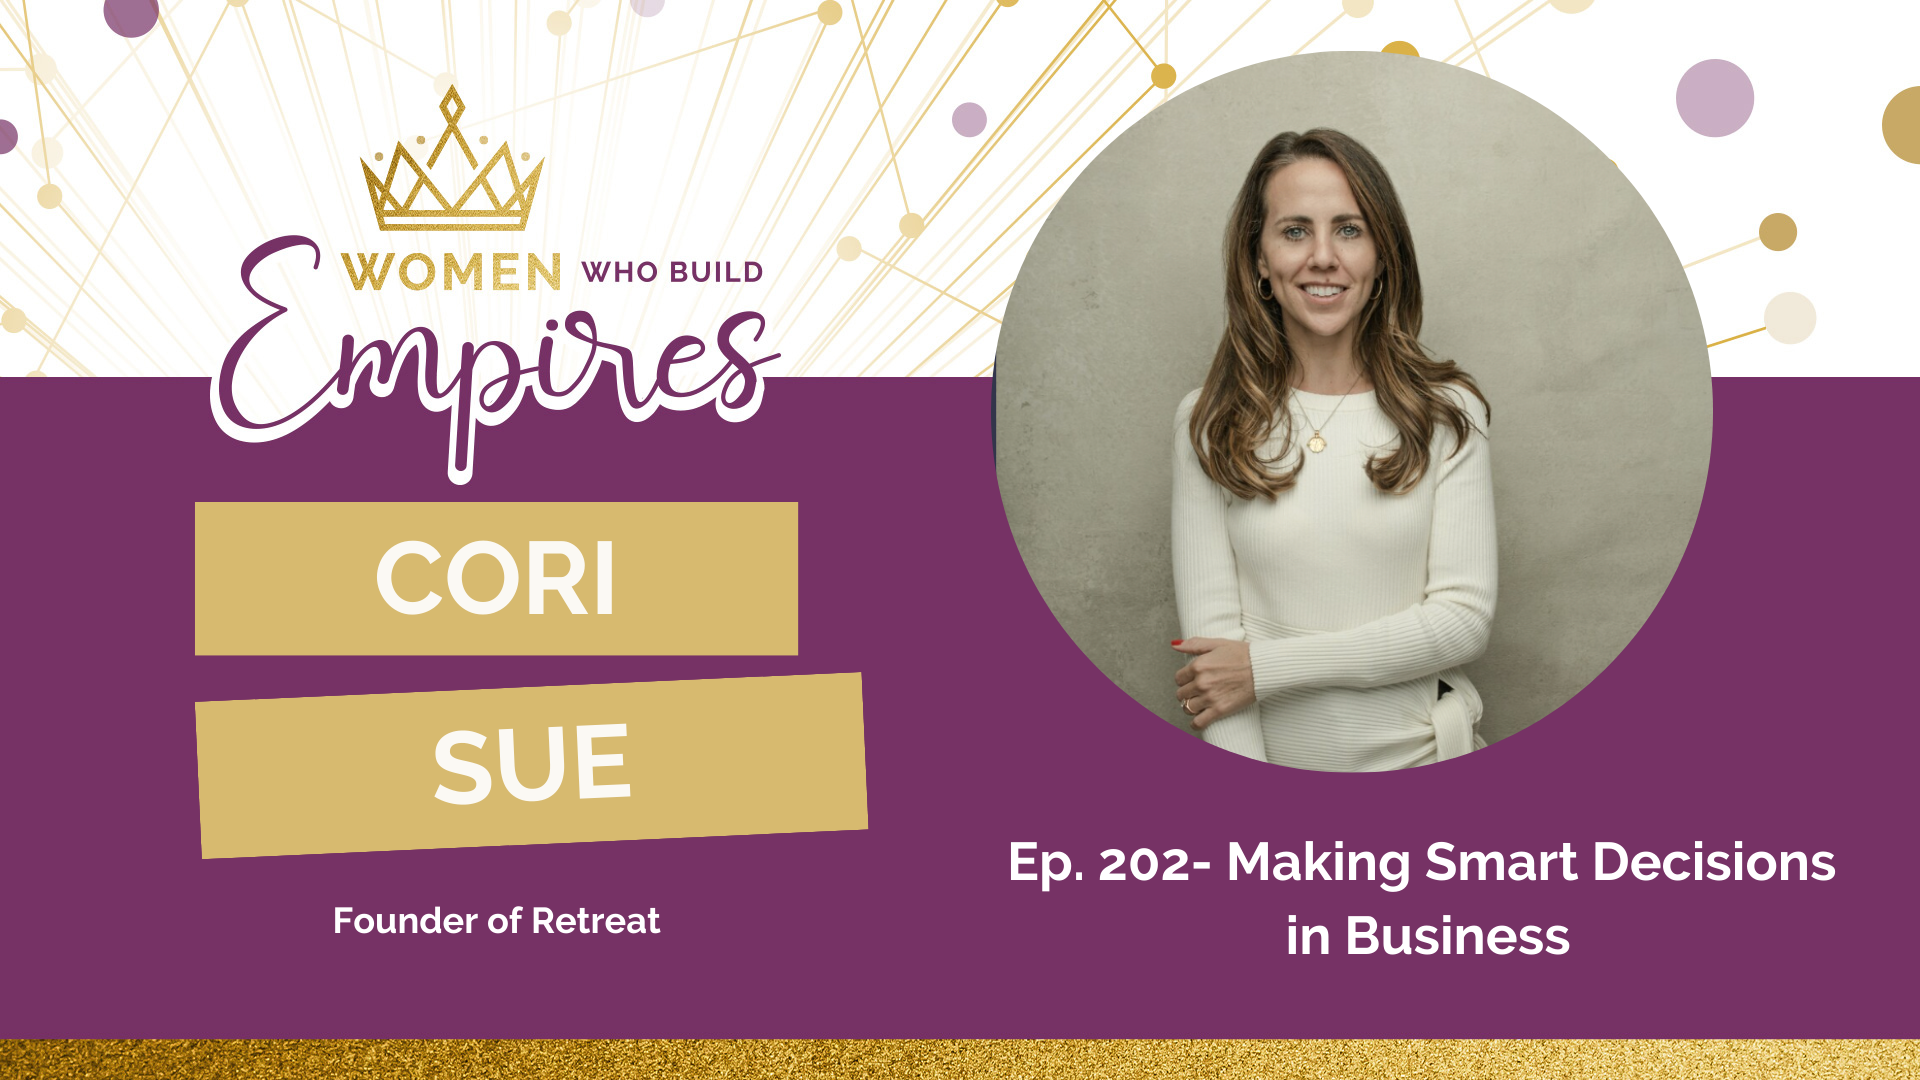 Ep. 202 Cori Sue Morris: Why Curiosity Will Help You be More Successful